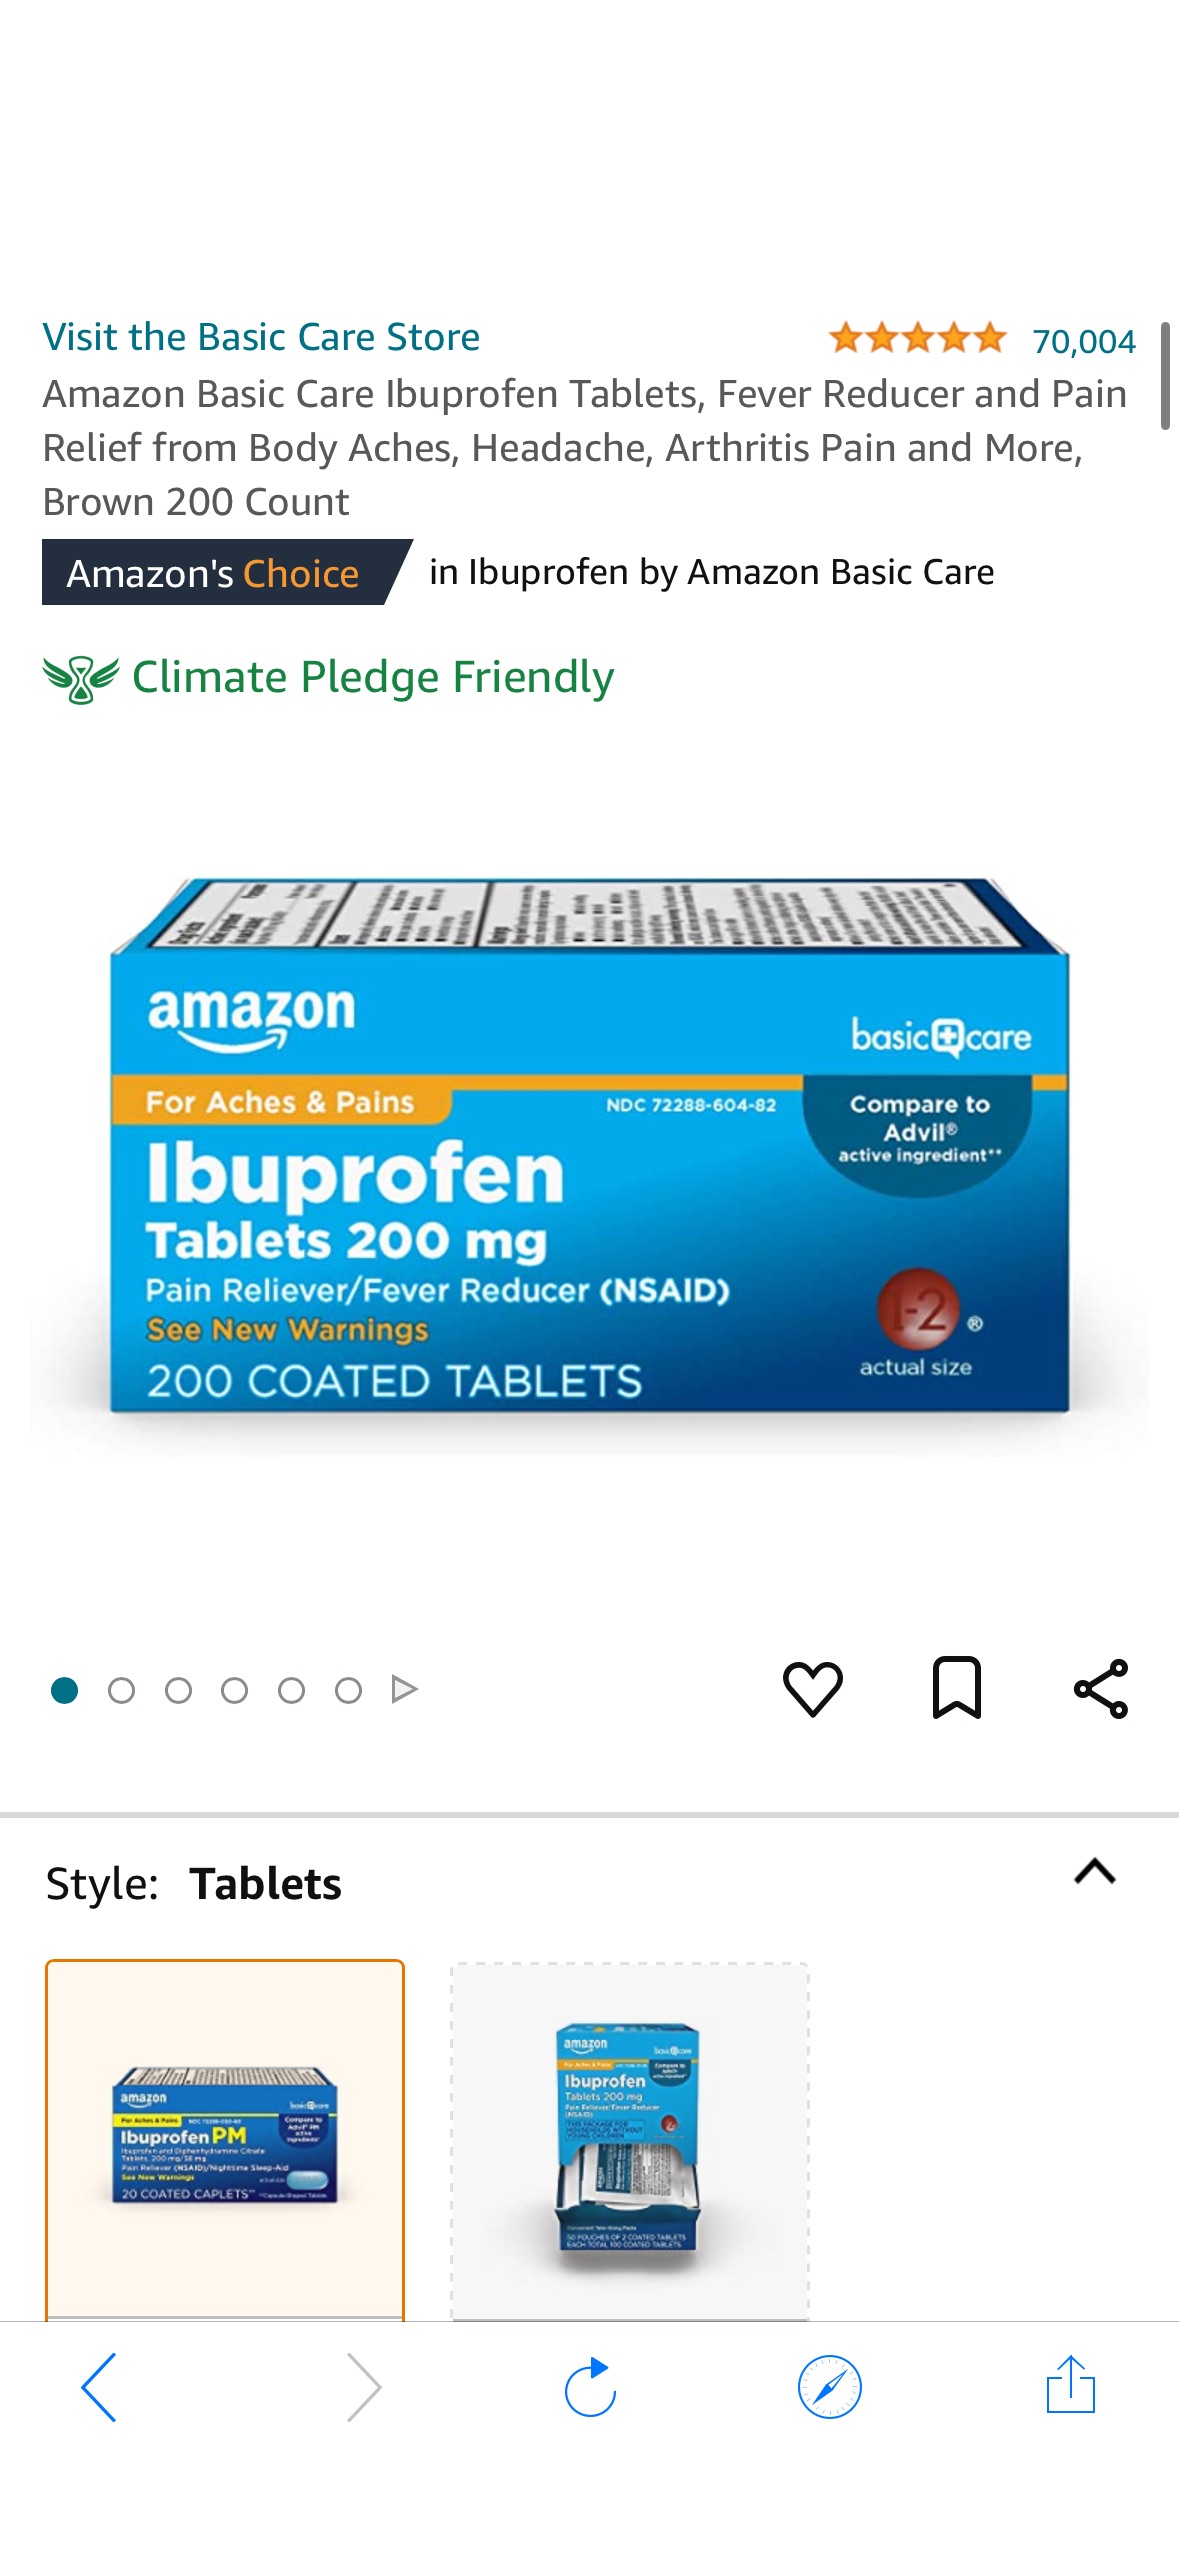 Amazon.com: Amazon Basic Care Ibuprofen Tablets, Fever Reducer and Pain Relief from Body Aches, Headache, Arthritis Pain and More, Brown 200 Count布洛芬